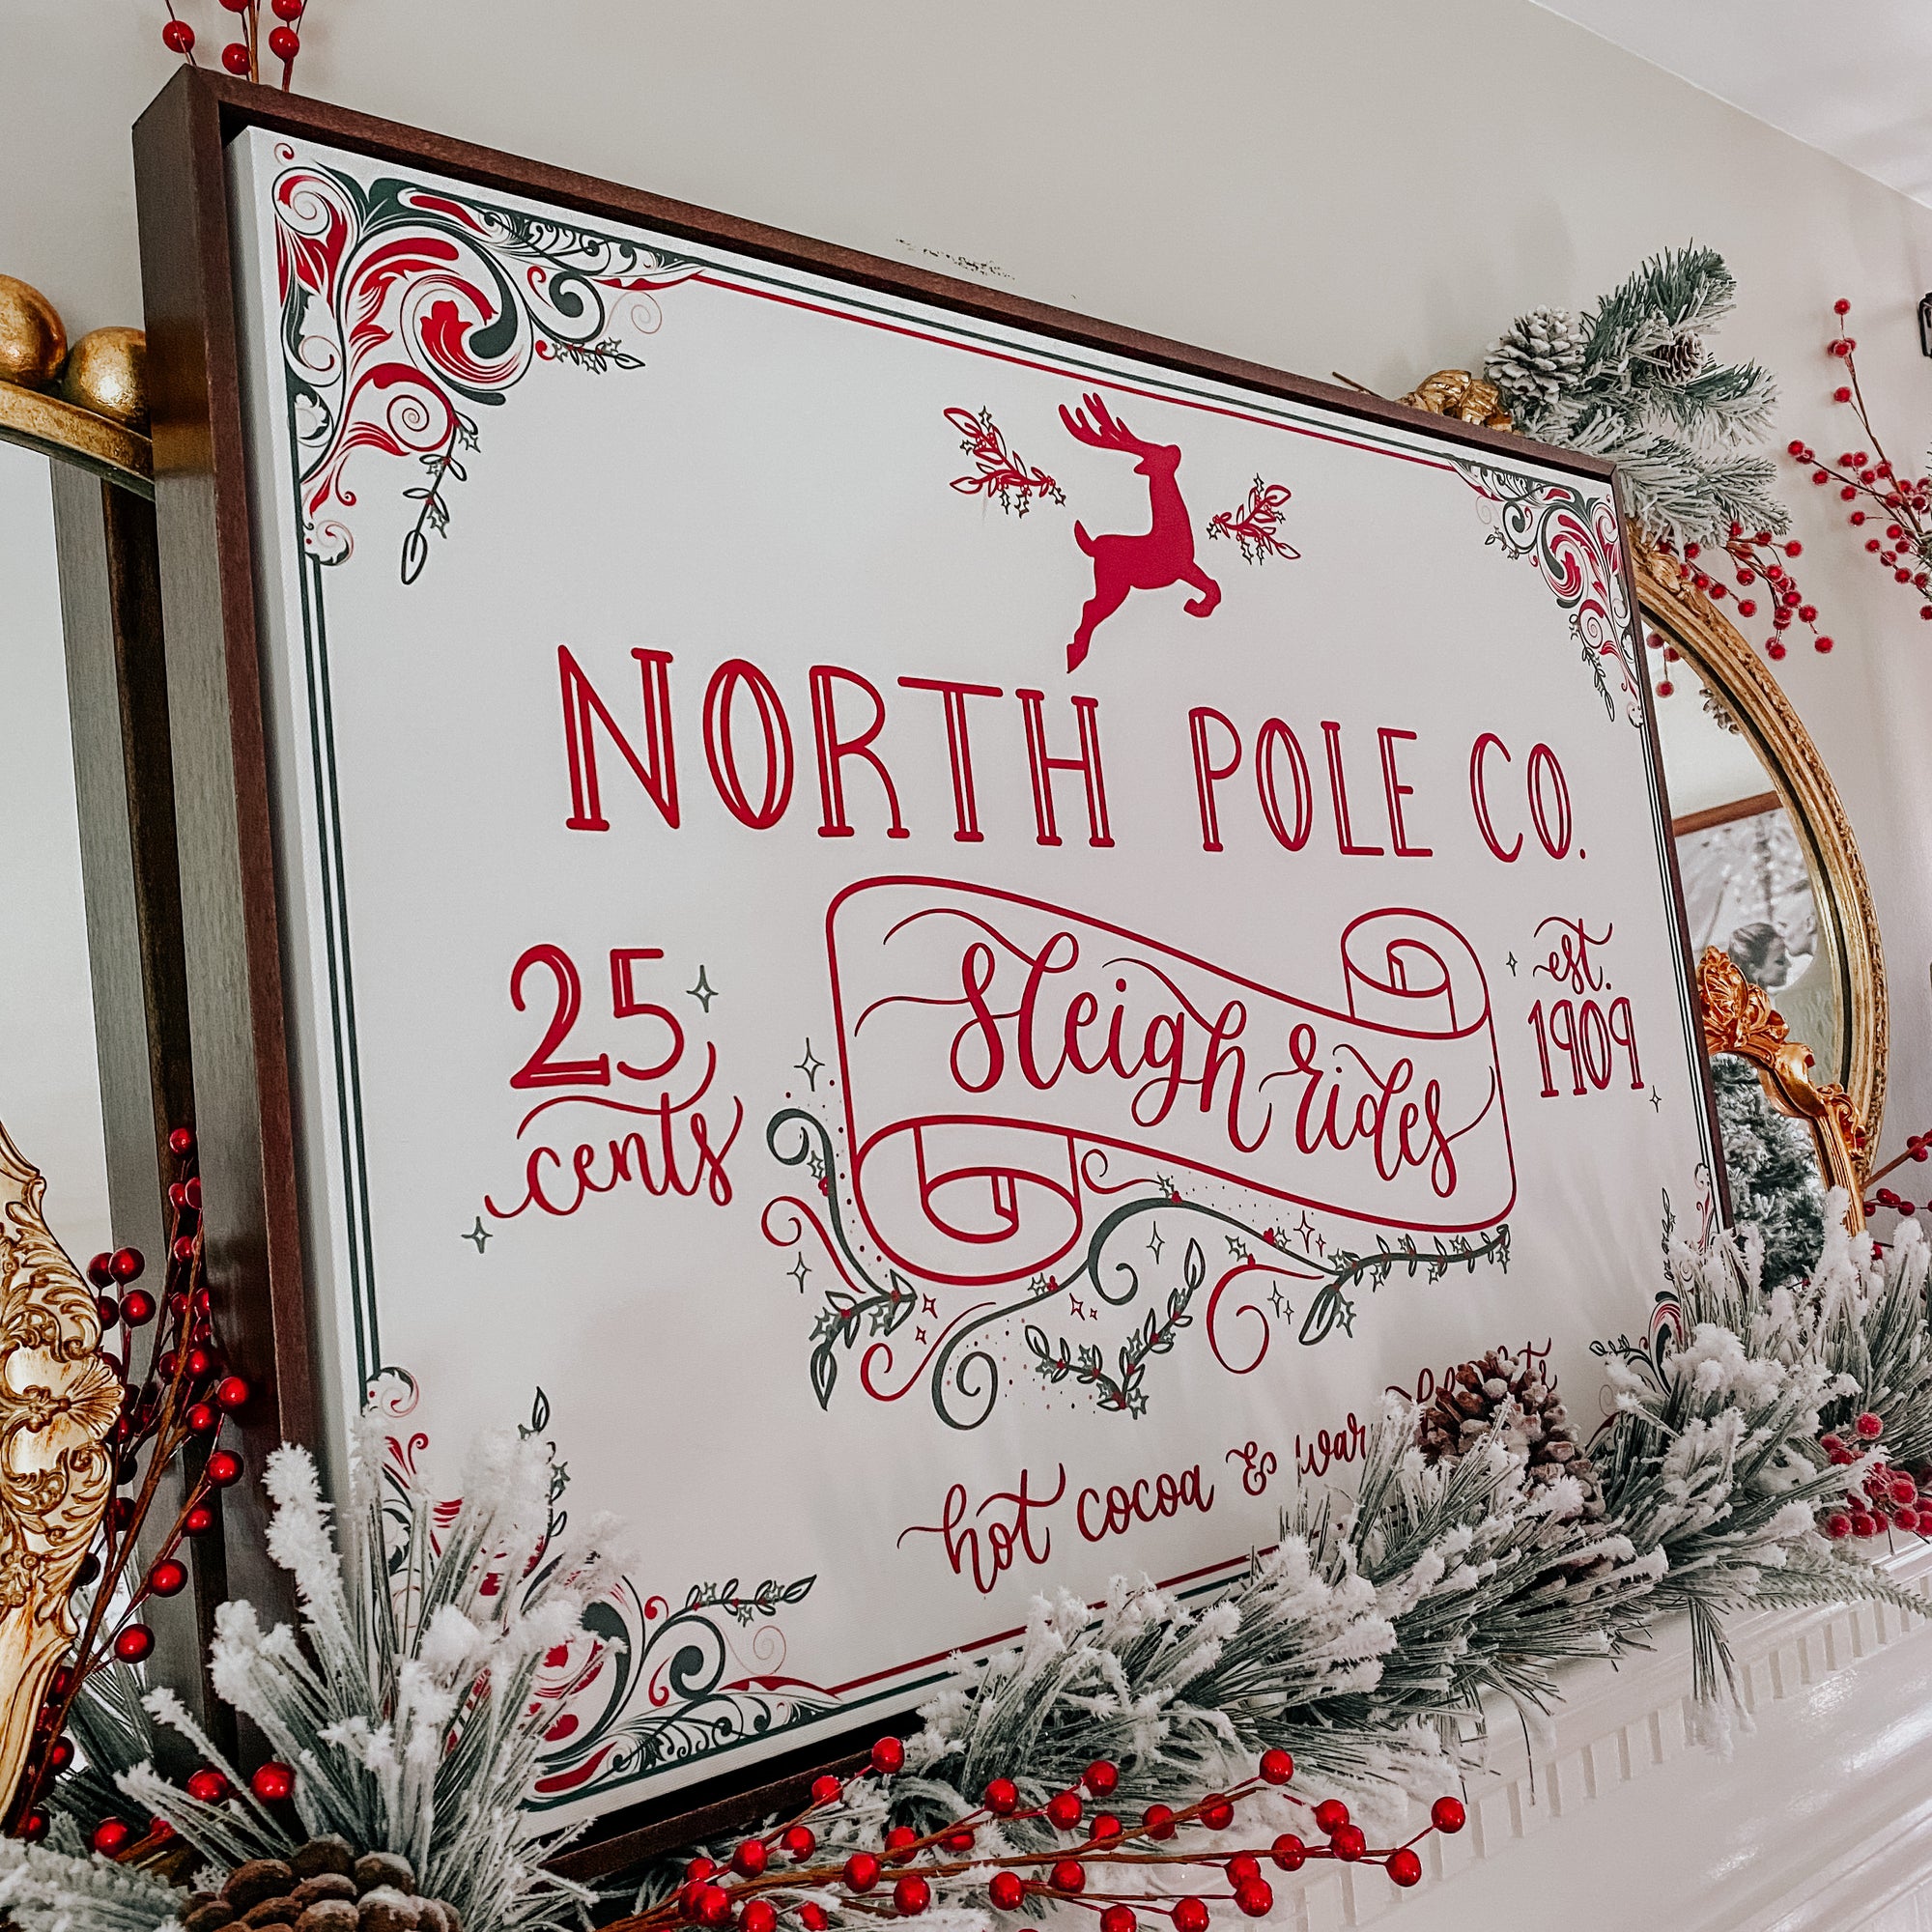 North Pole Co. Framed Canvas